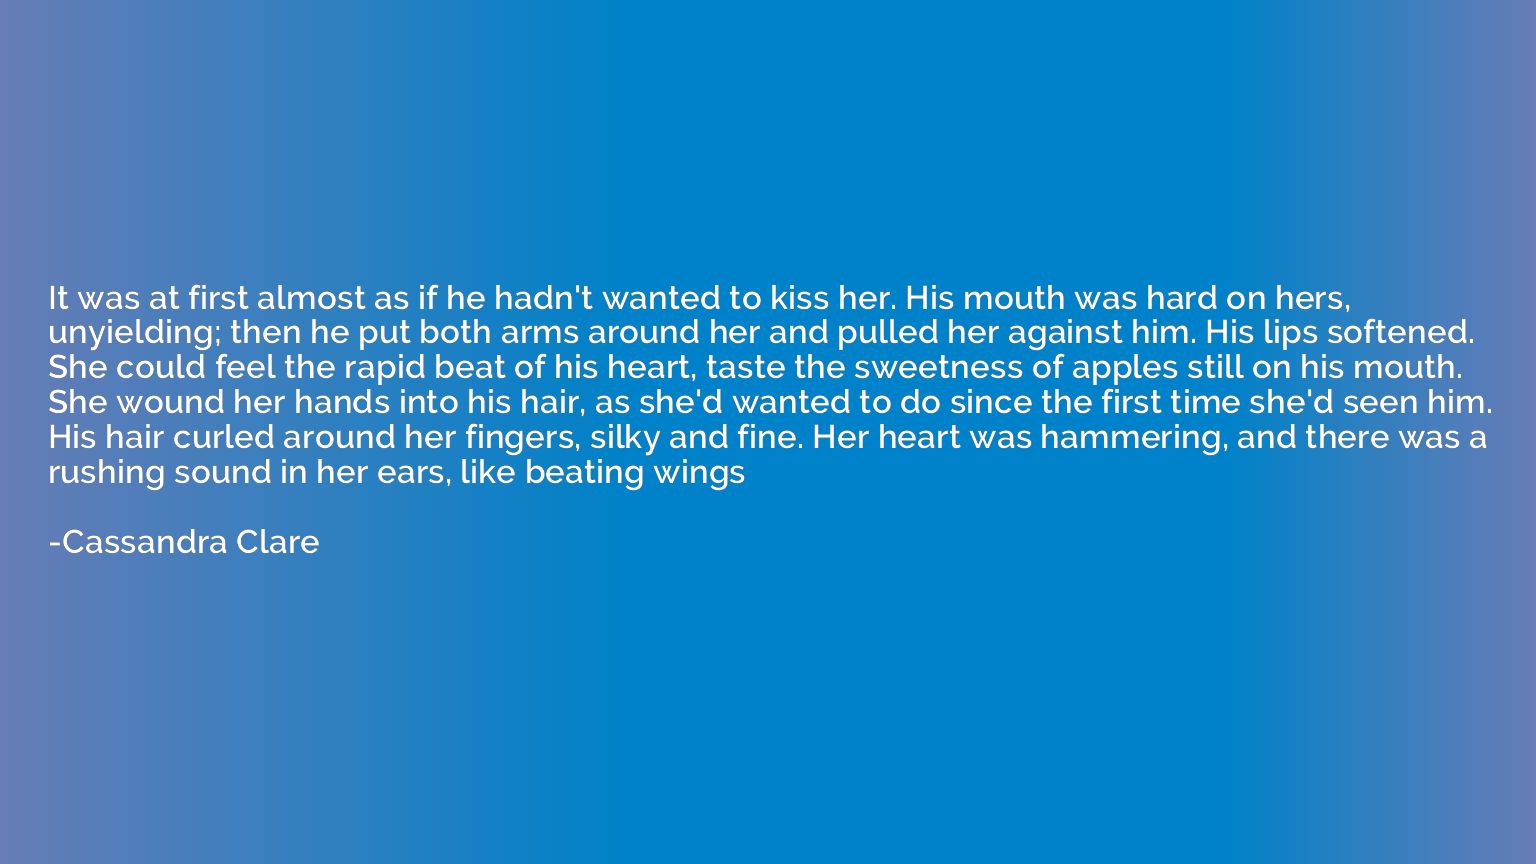 It was at first almost as if he hadn't wanted to kiss her. H